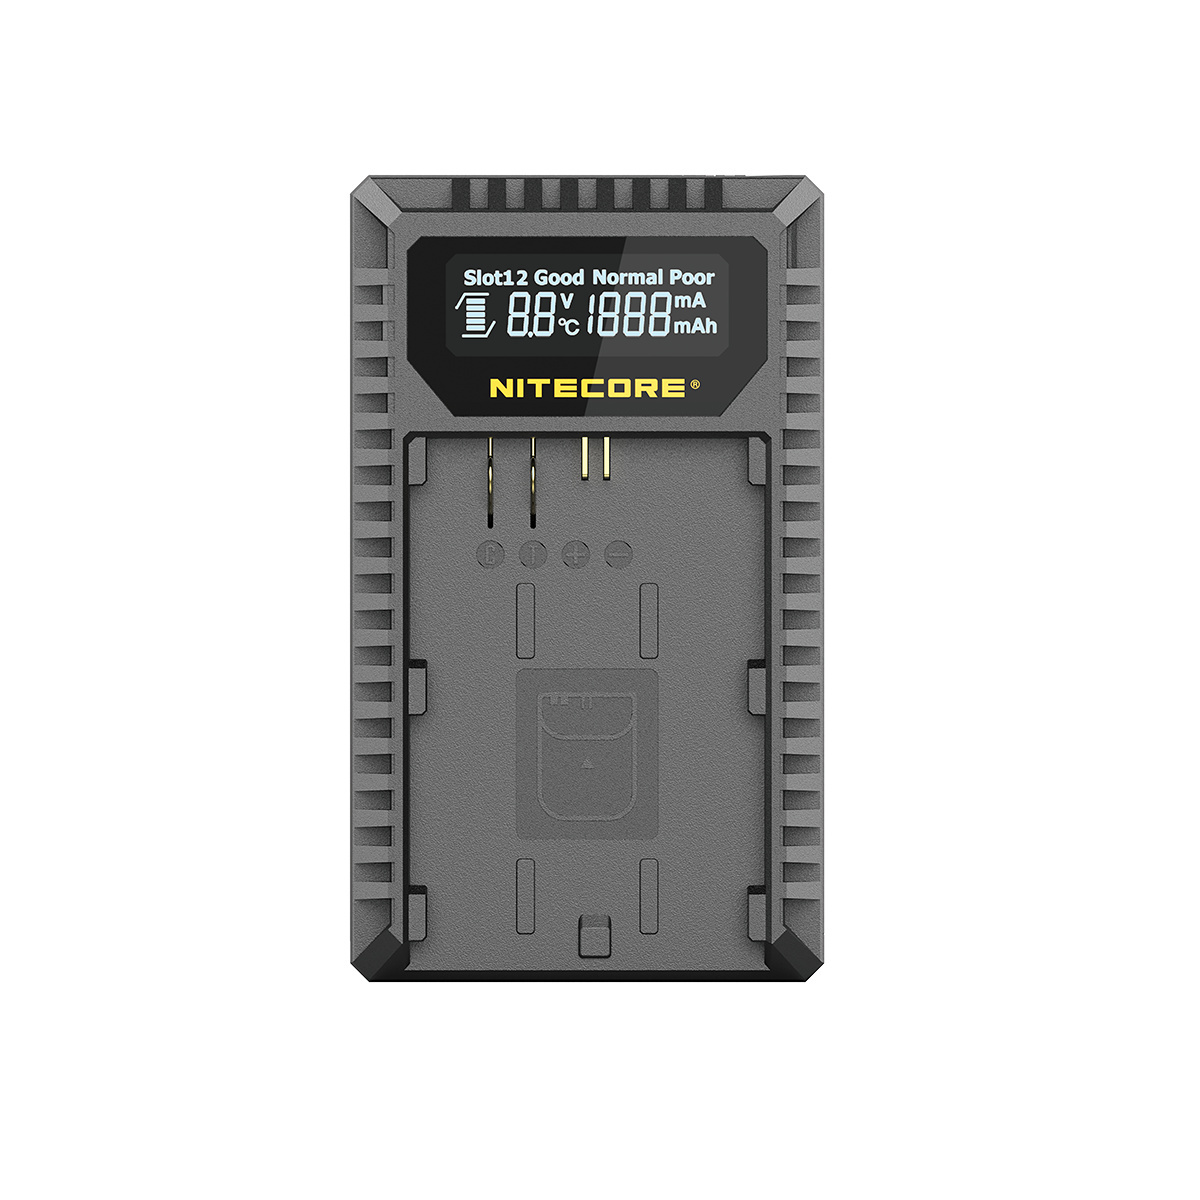 Nitecore UCN3 USB Charger for Canon LP-E6N Batteries